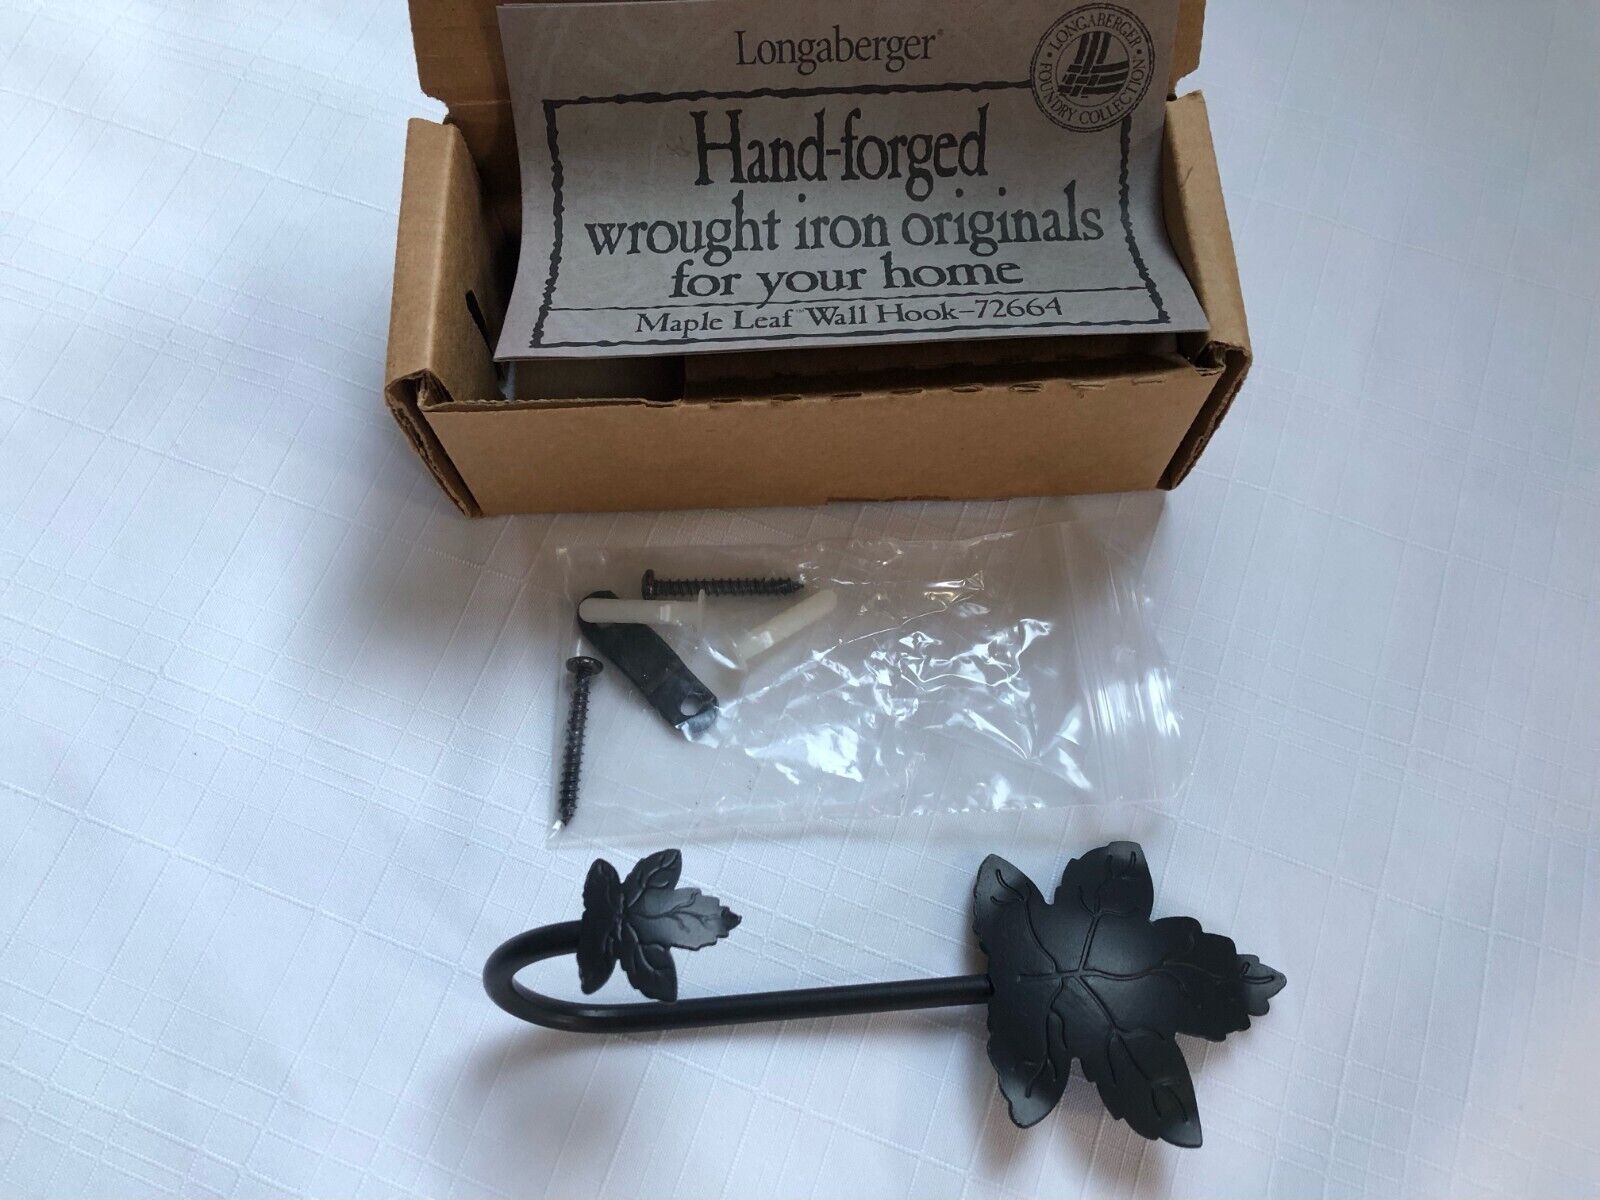 LONGABERGER Wall Hook Maple Leaf Wrought Iron #72664 - 1998 - NEW in Box UNIQUE